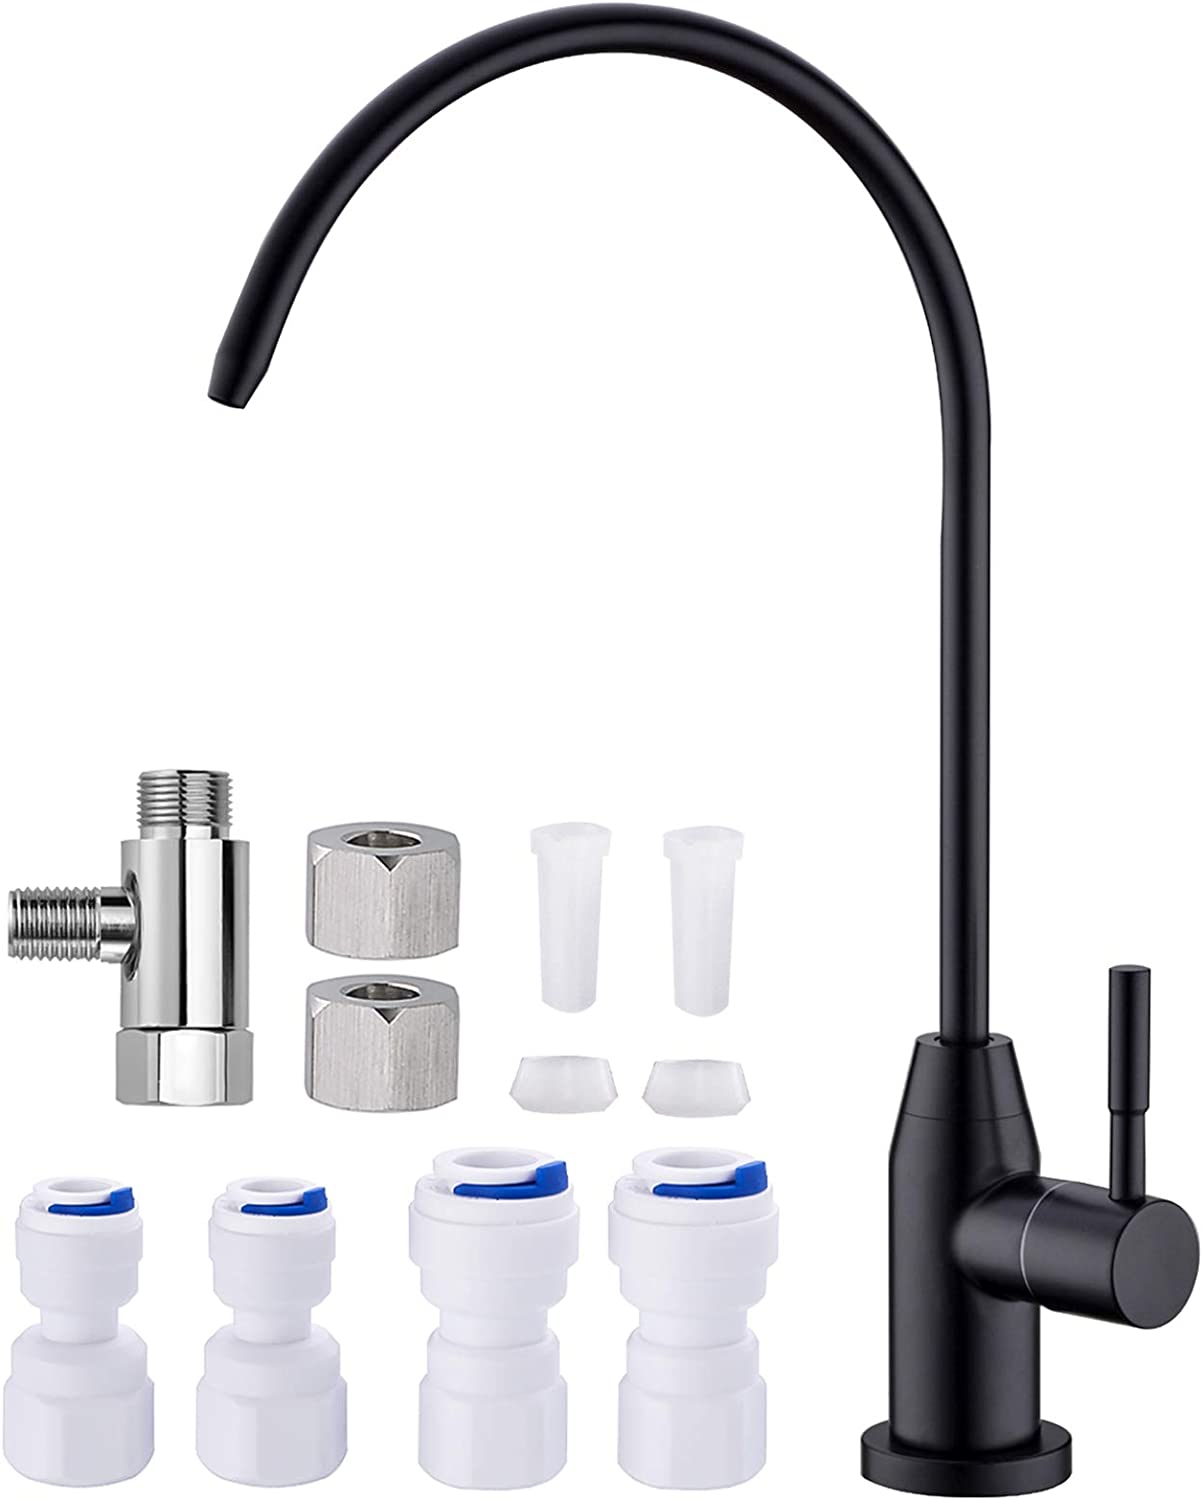 SINKINGDOM Matte Black Drinking Water Faucet Kit with Complete Fitting for Reverse Osmosis Filtration System,Lead-Free 304